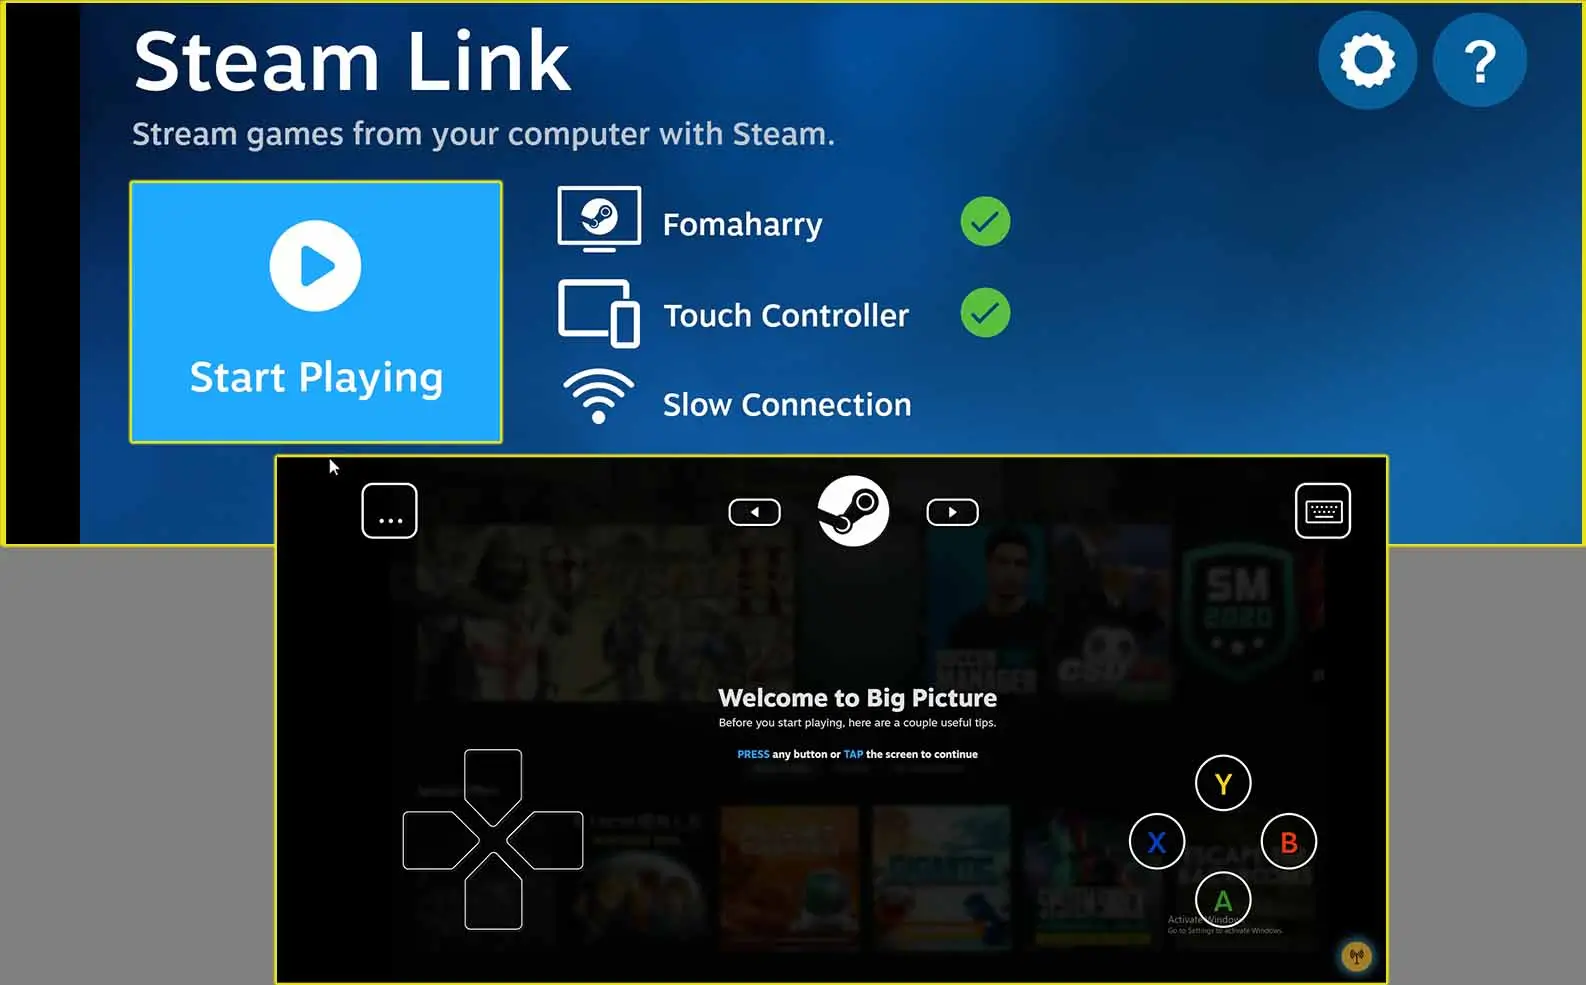 Start Playing Games with Steam Link